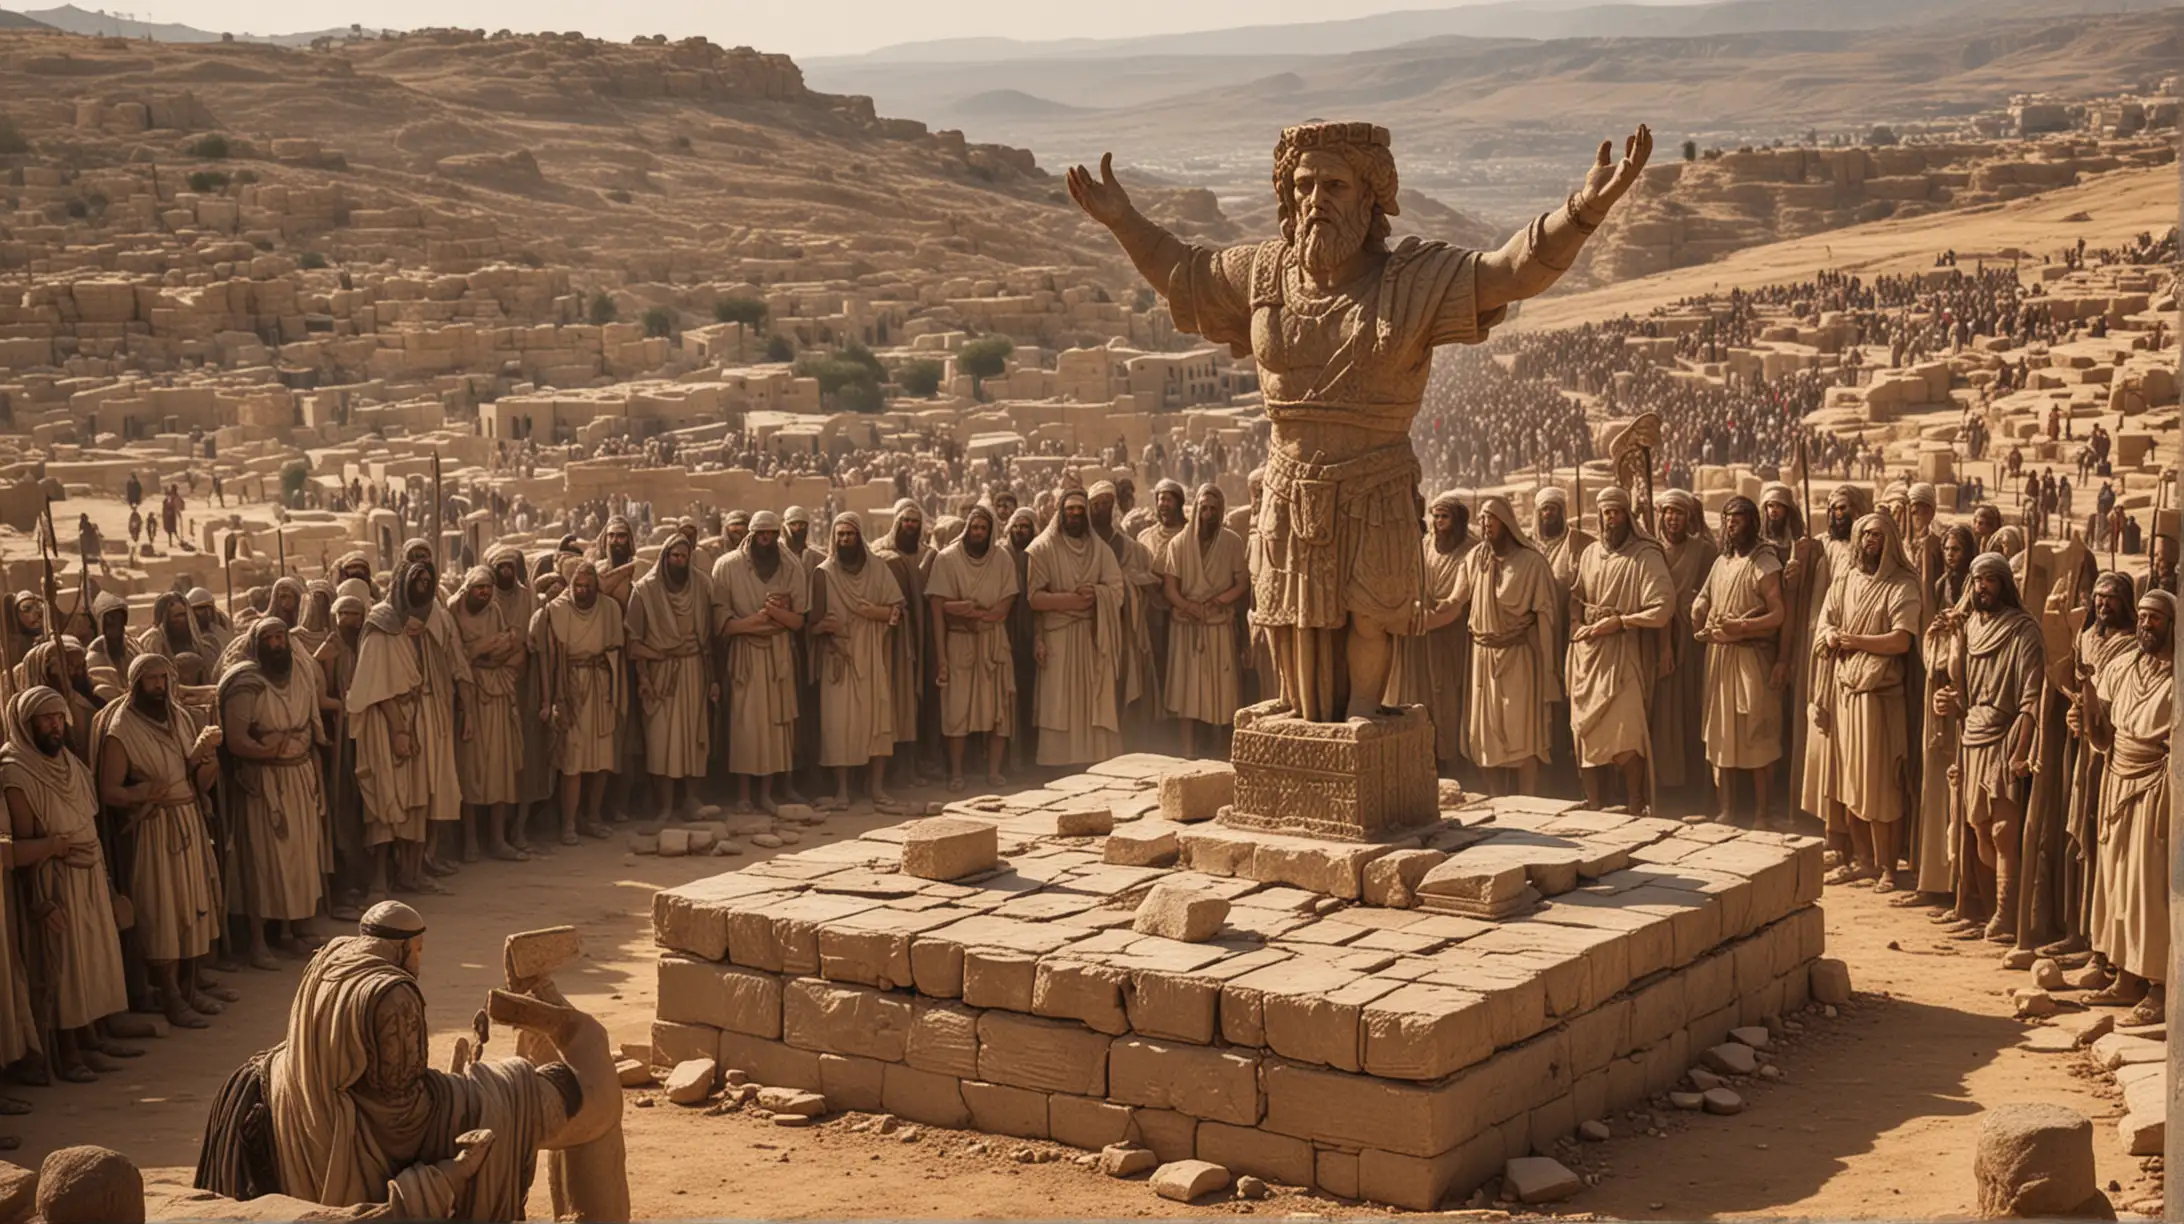 Biblical Statue of Baal and Altar with Worshipers in Ancient Joshua Era